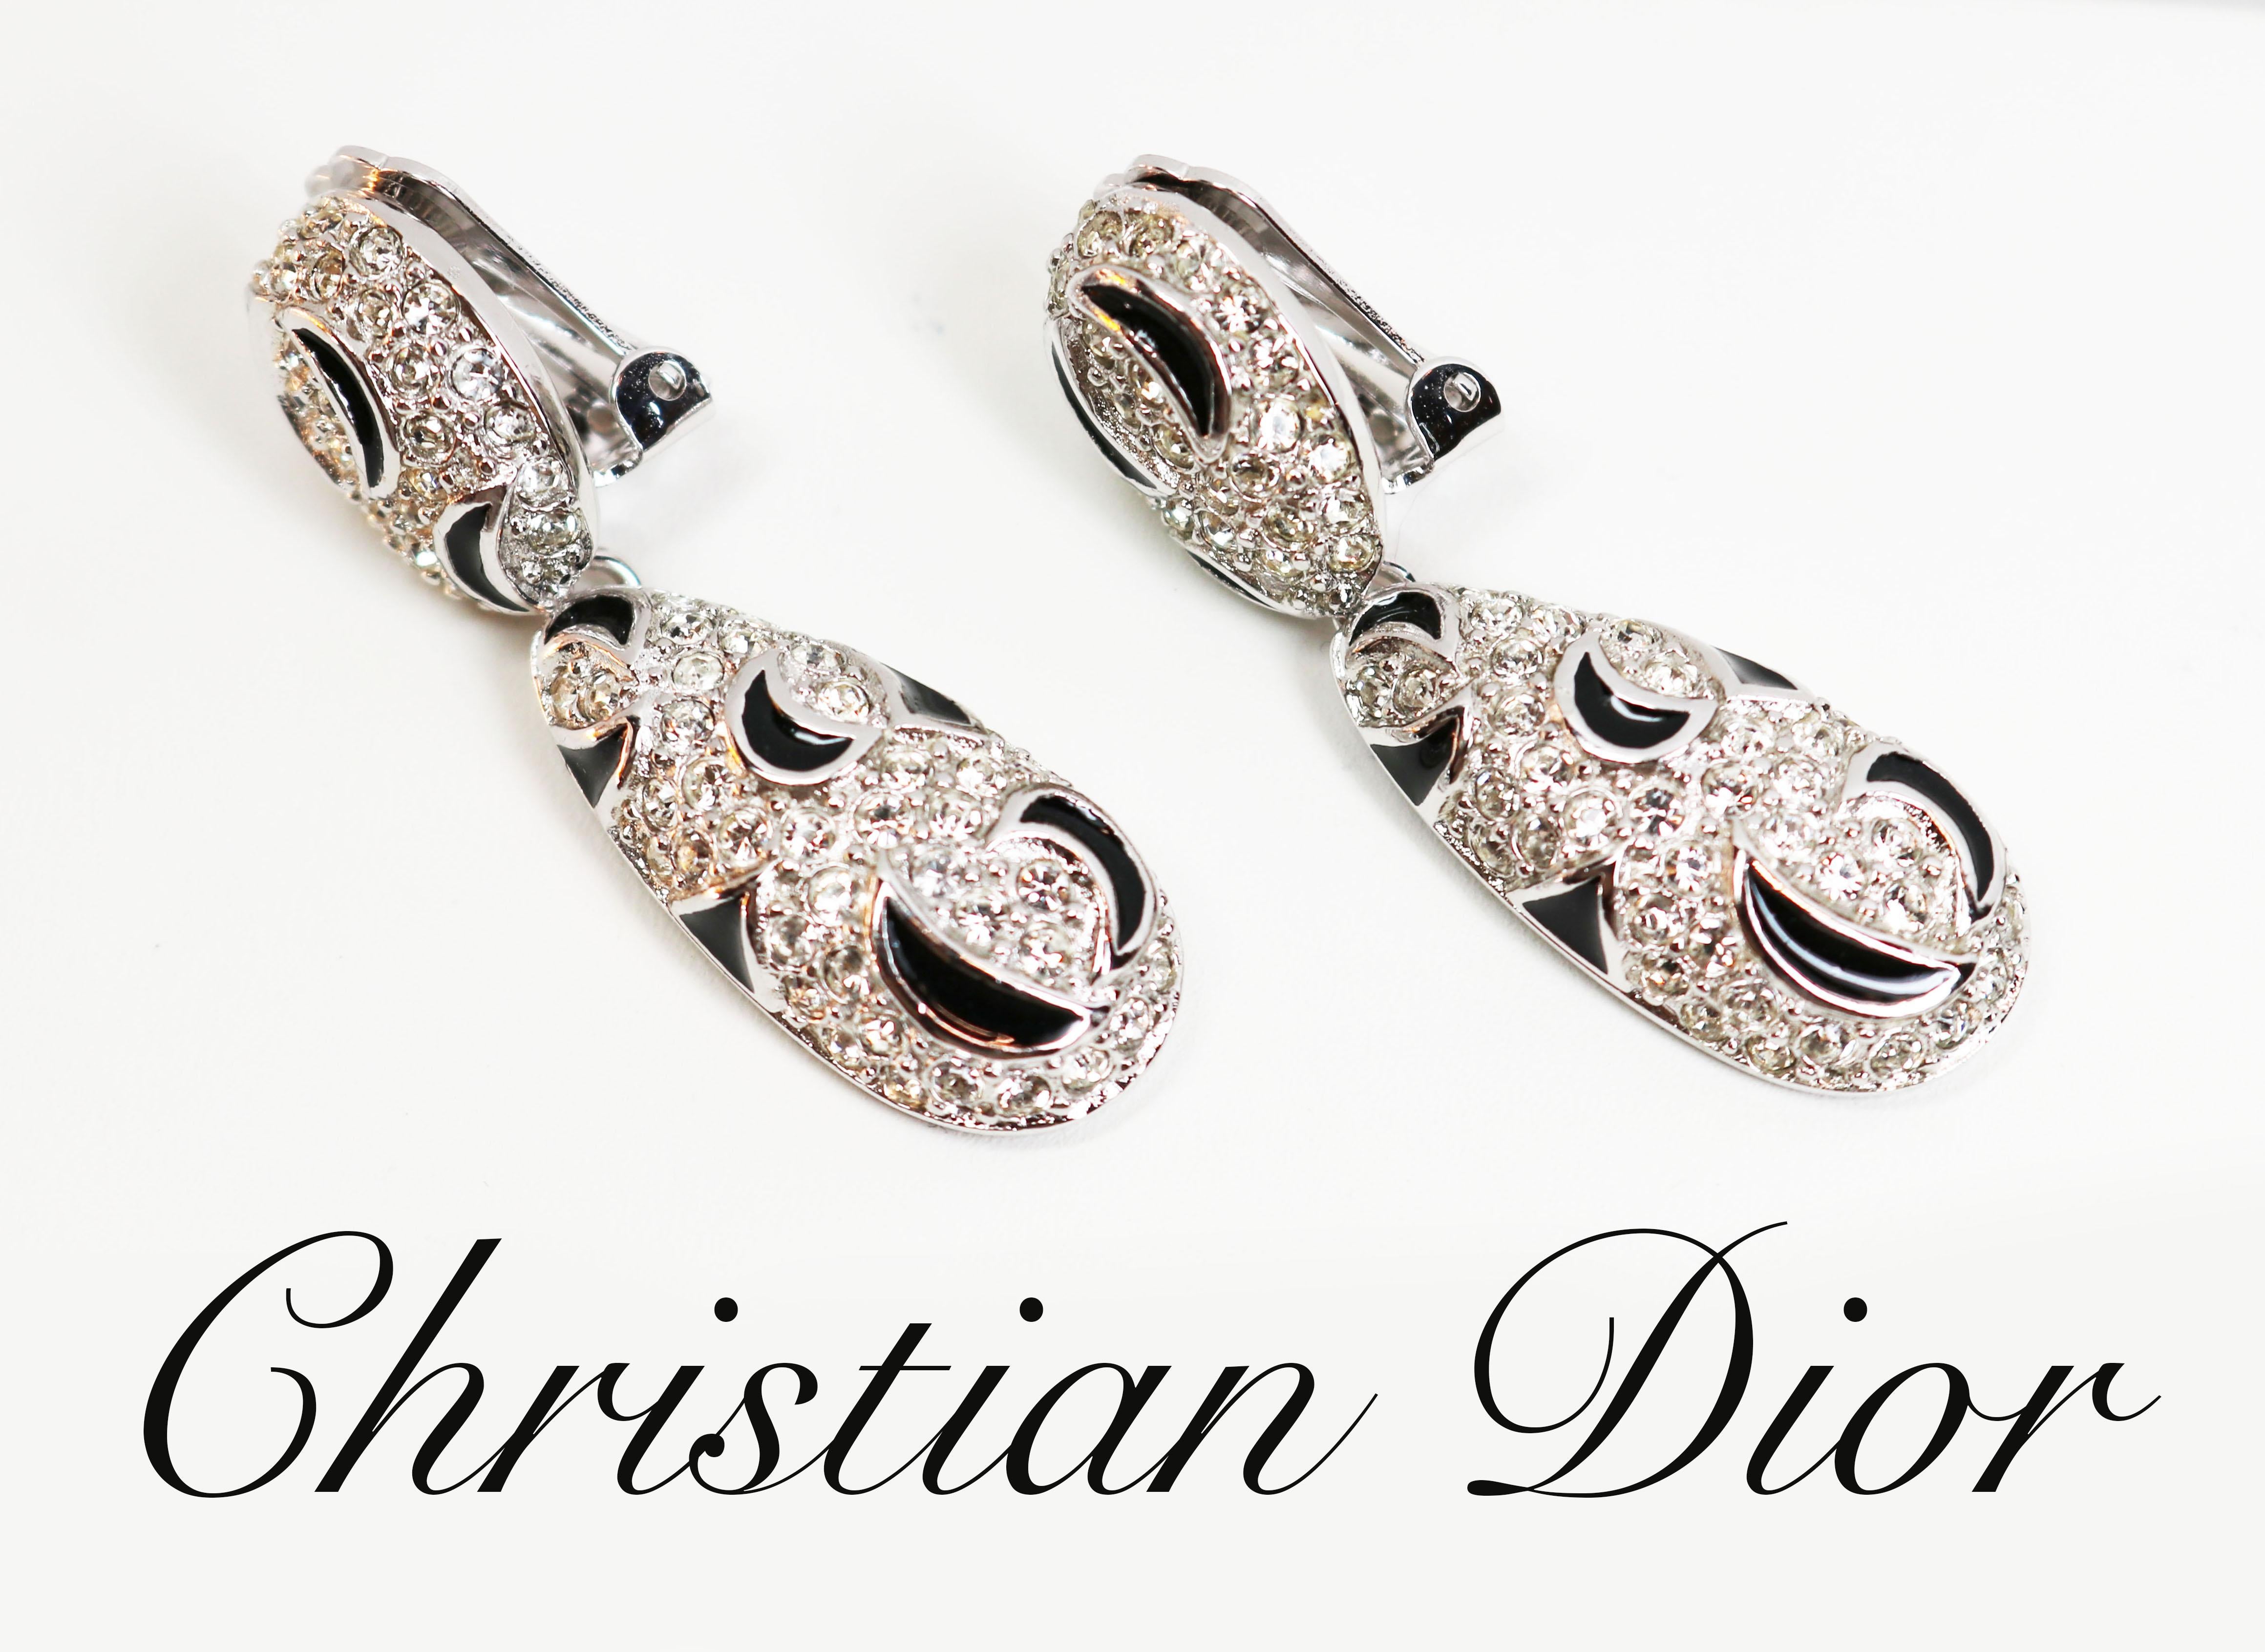 CHRISTIAN DIOR EARRINGS *signed* Authentic Crystal Encrusted Gold Plated Black Enamel Floral Clip On Dior Paris Designer Earrings New With Tags
These Dior designer earrings feature Austrian crystals encrusted in a black enamel highlighted flower